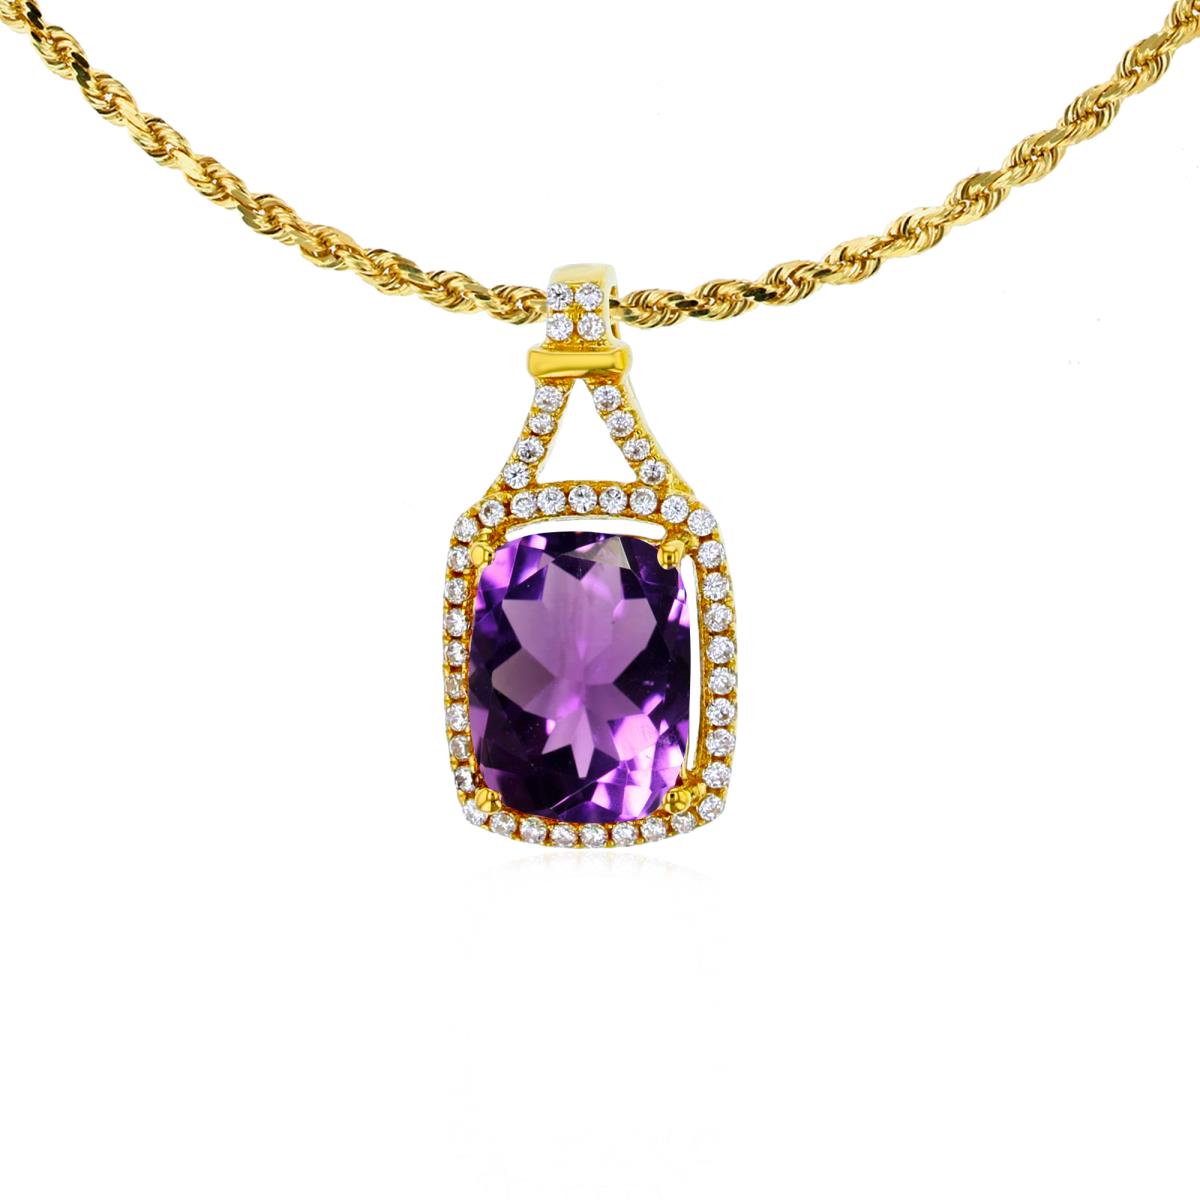 10K Yellow Gold 8x6mm Cushion Amethyst & 0.13 CTTW Rd Diamonds Halo 18" Rope Chain Necklace